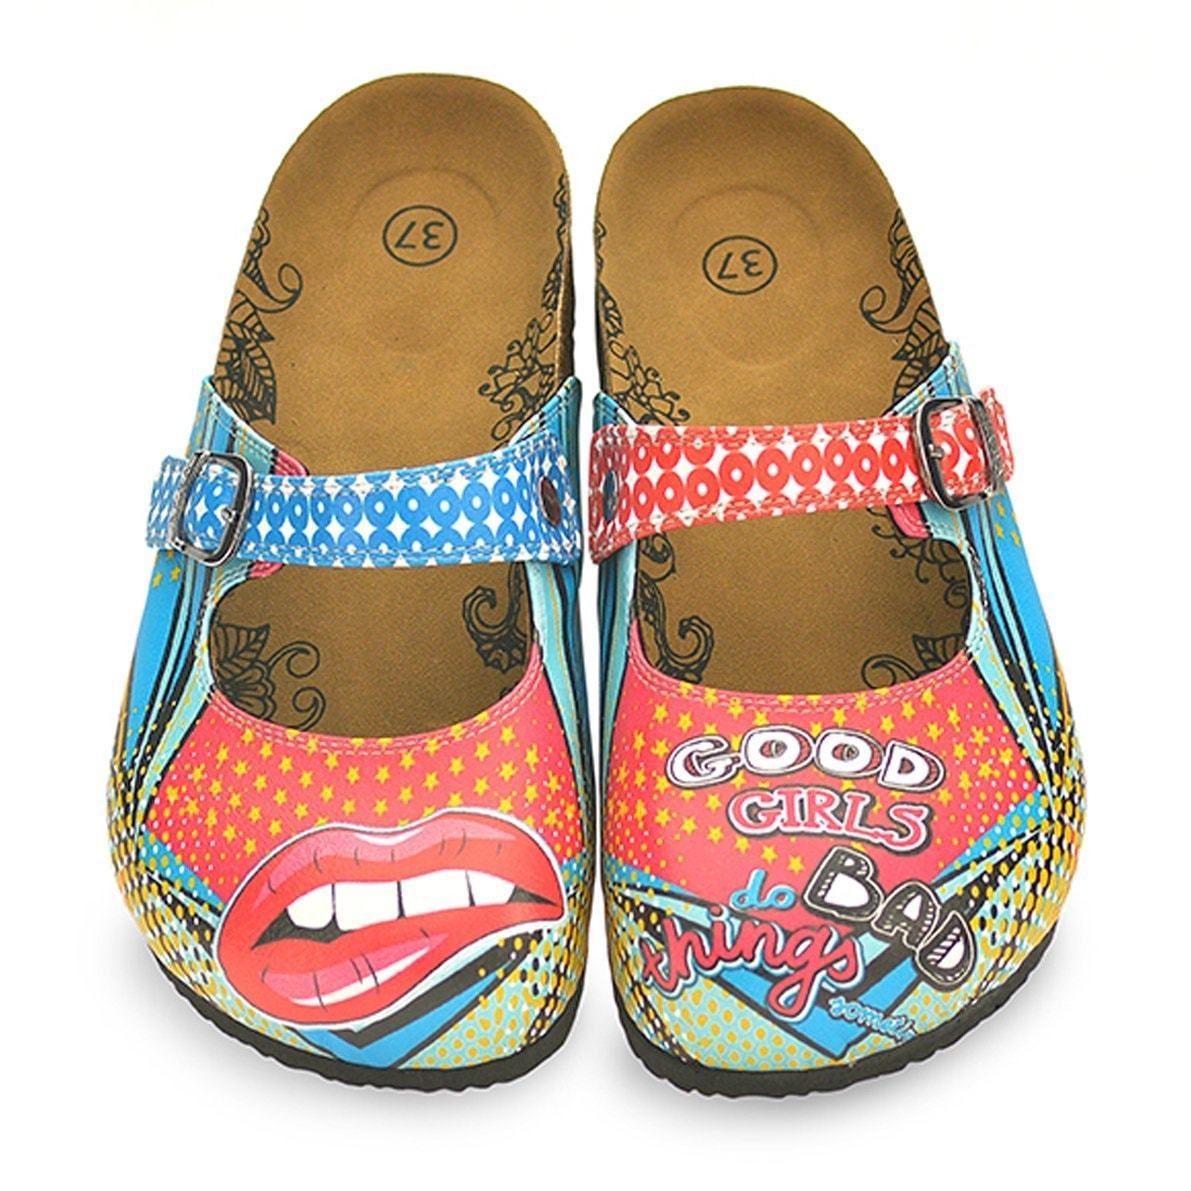 Red & Blue Good Girls Do Bad Things Clogs CAL801 (737679638624)